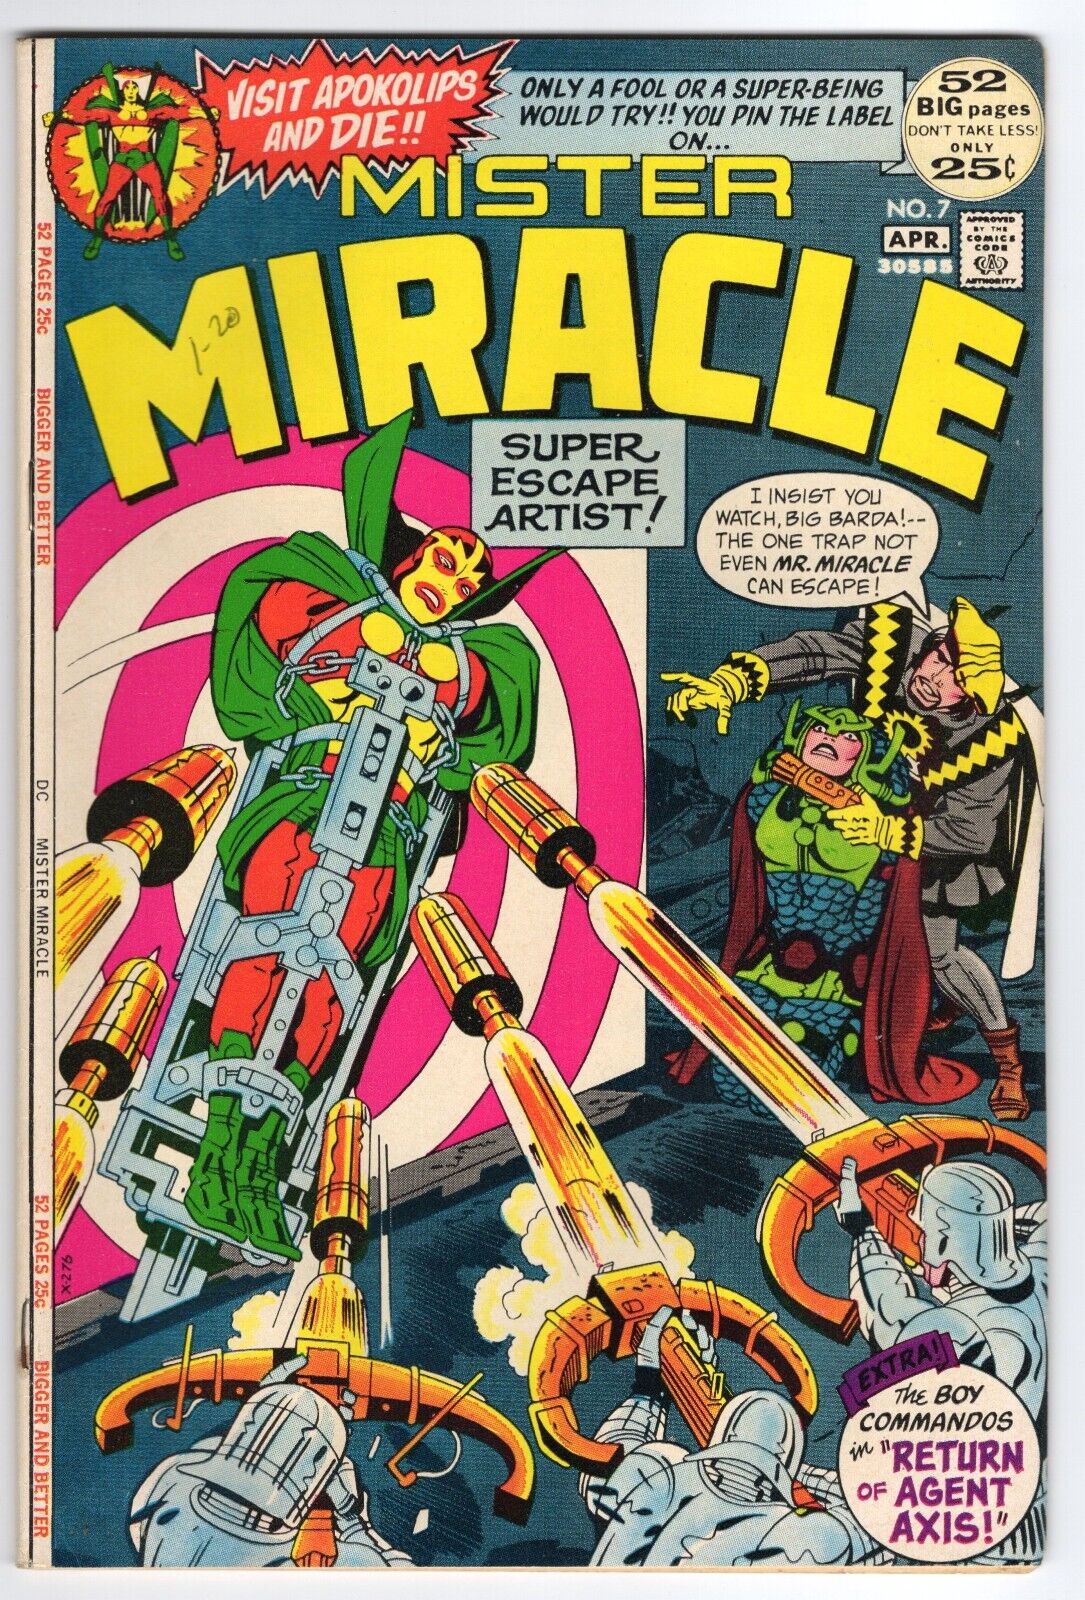 Mister Miracle #7 (1972) - First app of Kanto - Barda cover - Kirby - F/VF